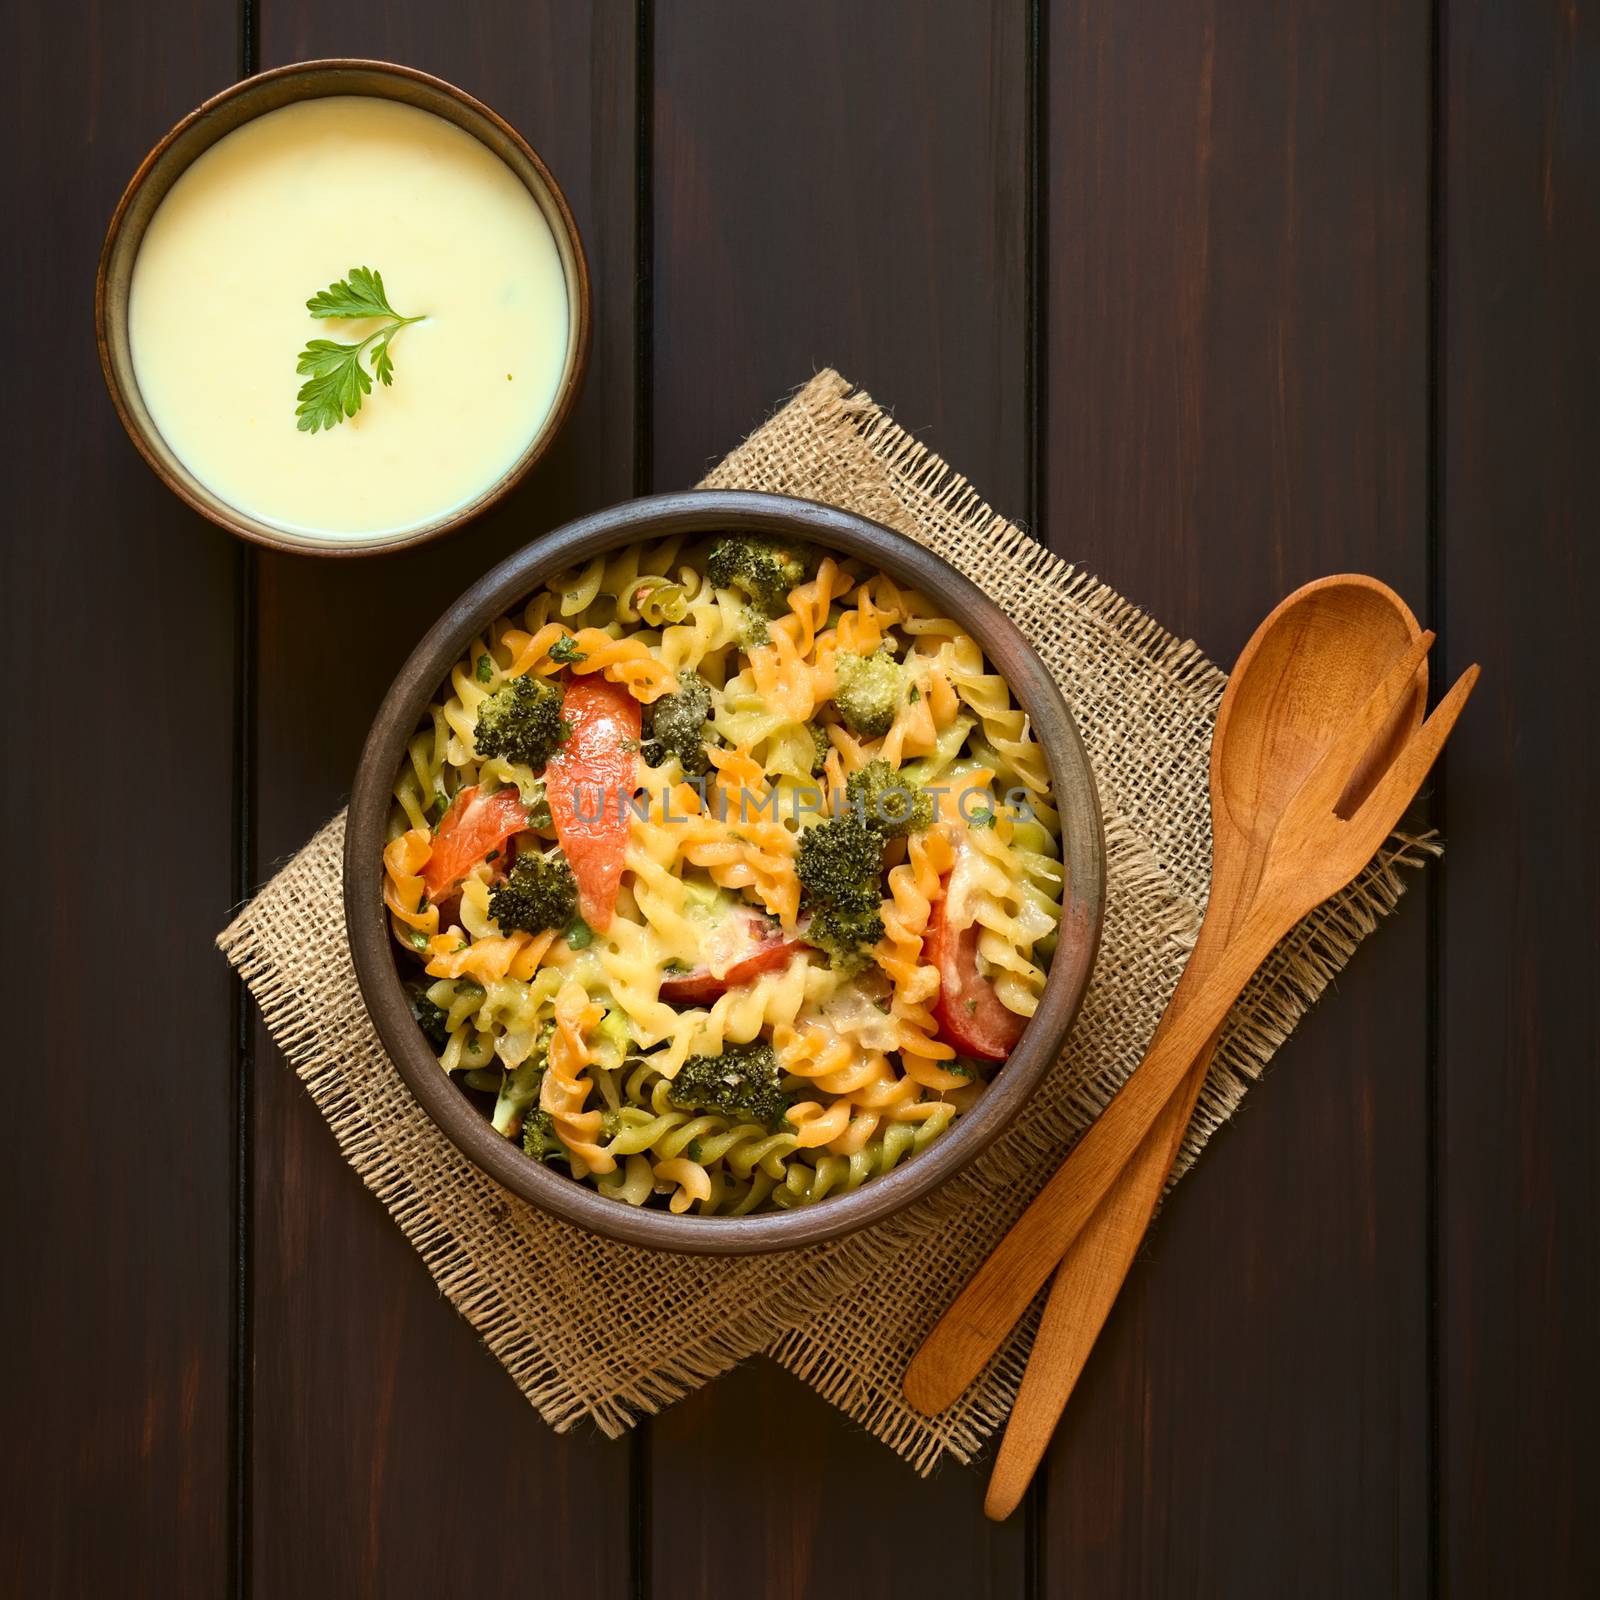 Baked tricolor fusilli pasta and vegetable (broccoli, tomato) casserole in rustic bowls, wooden spoon, fork and cream sauce on the side, photographed overhead on dark wood with natural light